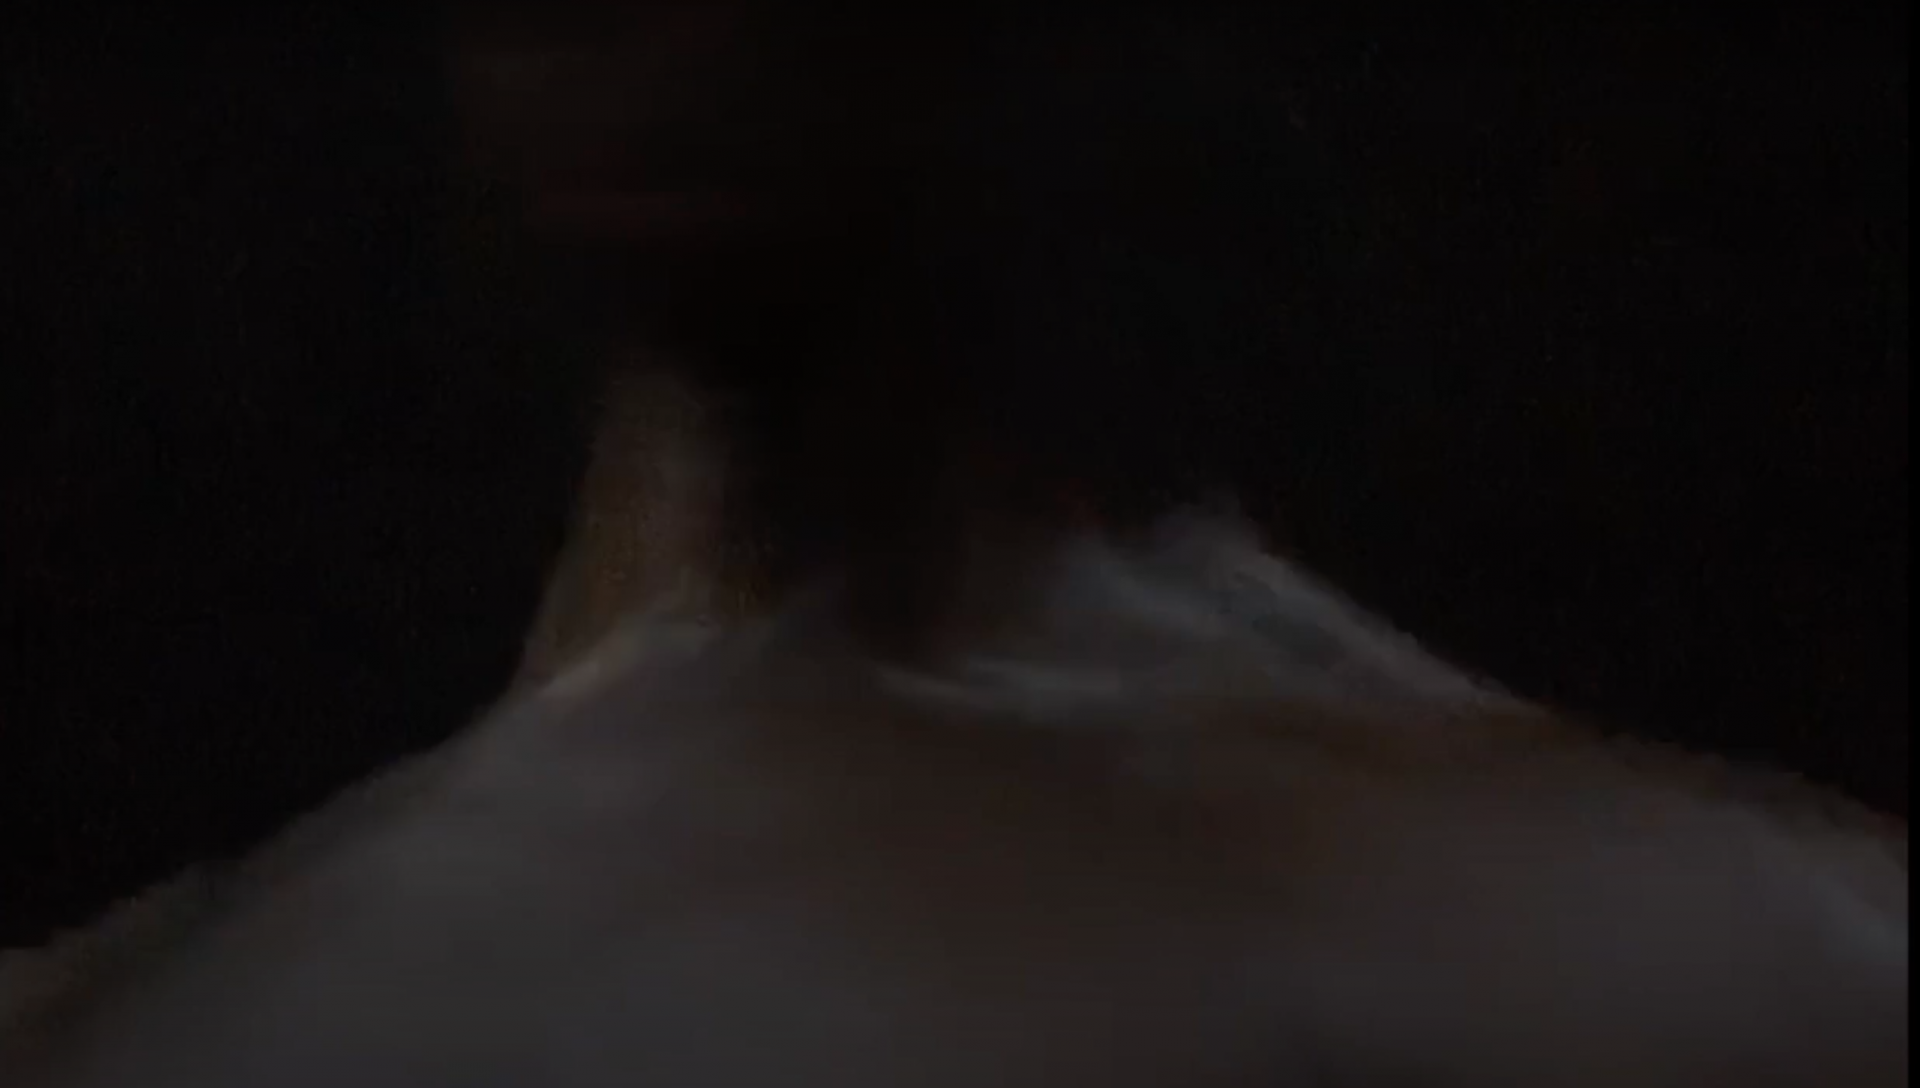 Raymond Pinto, *Shrine*, 2020. Video still, digital video, color, sound, 4:07 min.

[A close-cropped widescreen digital video image of the neck and shoulders of person seen from behind, slightly blurring and repeating against a black background.]